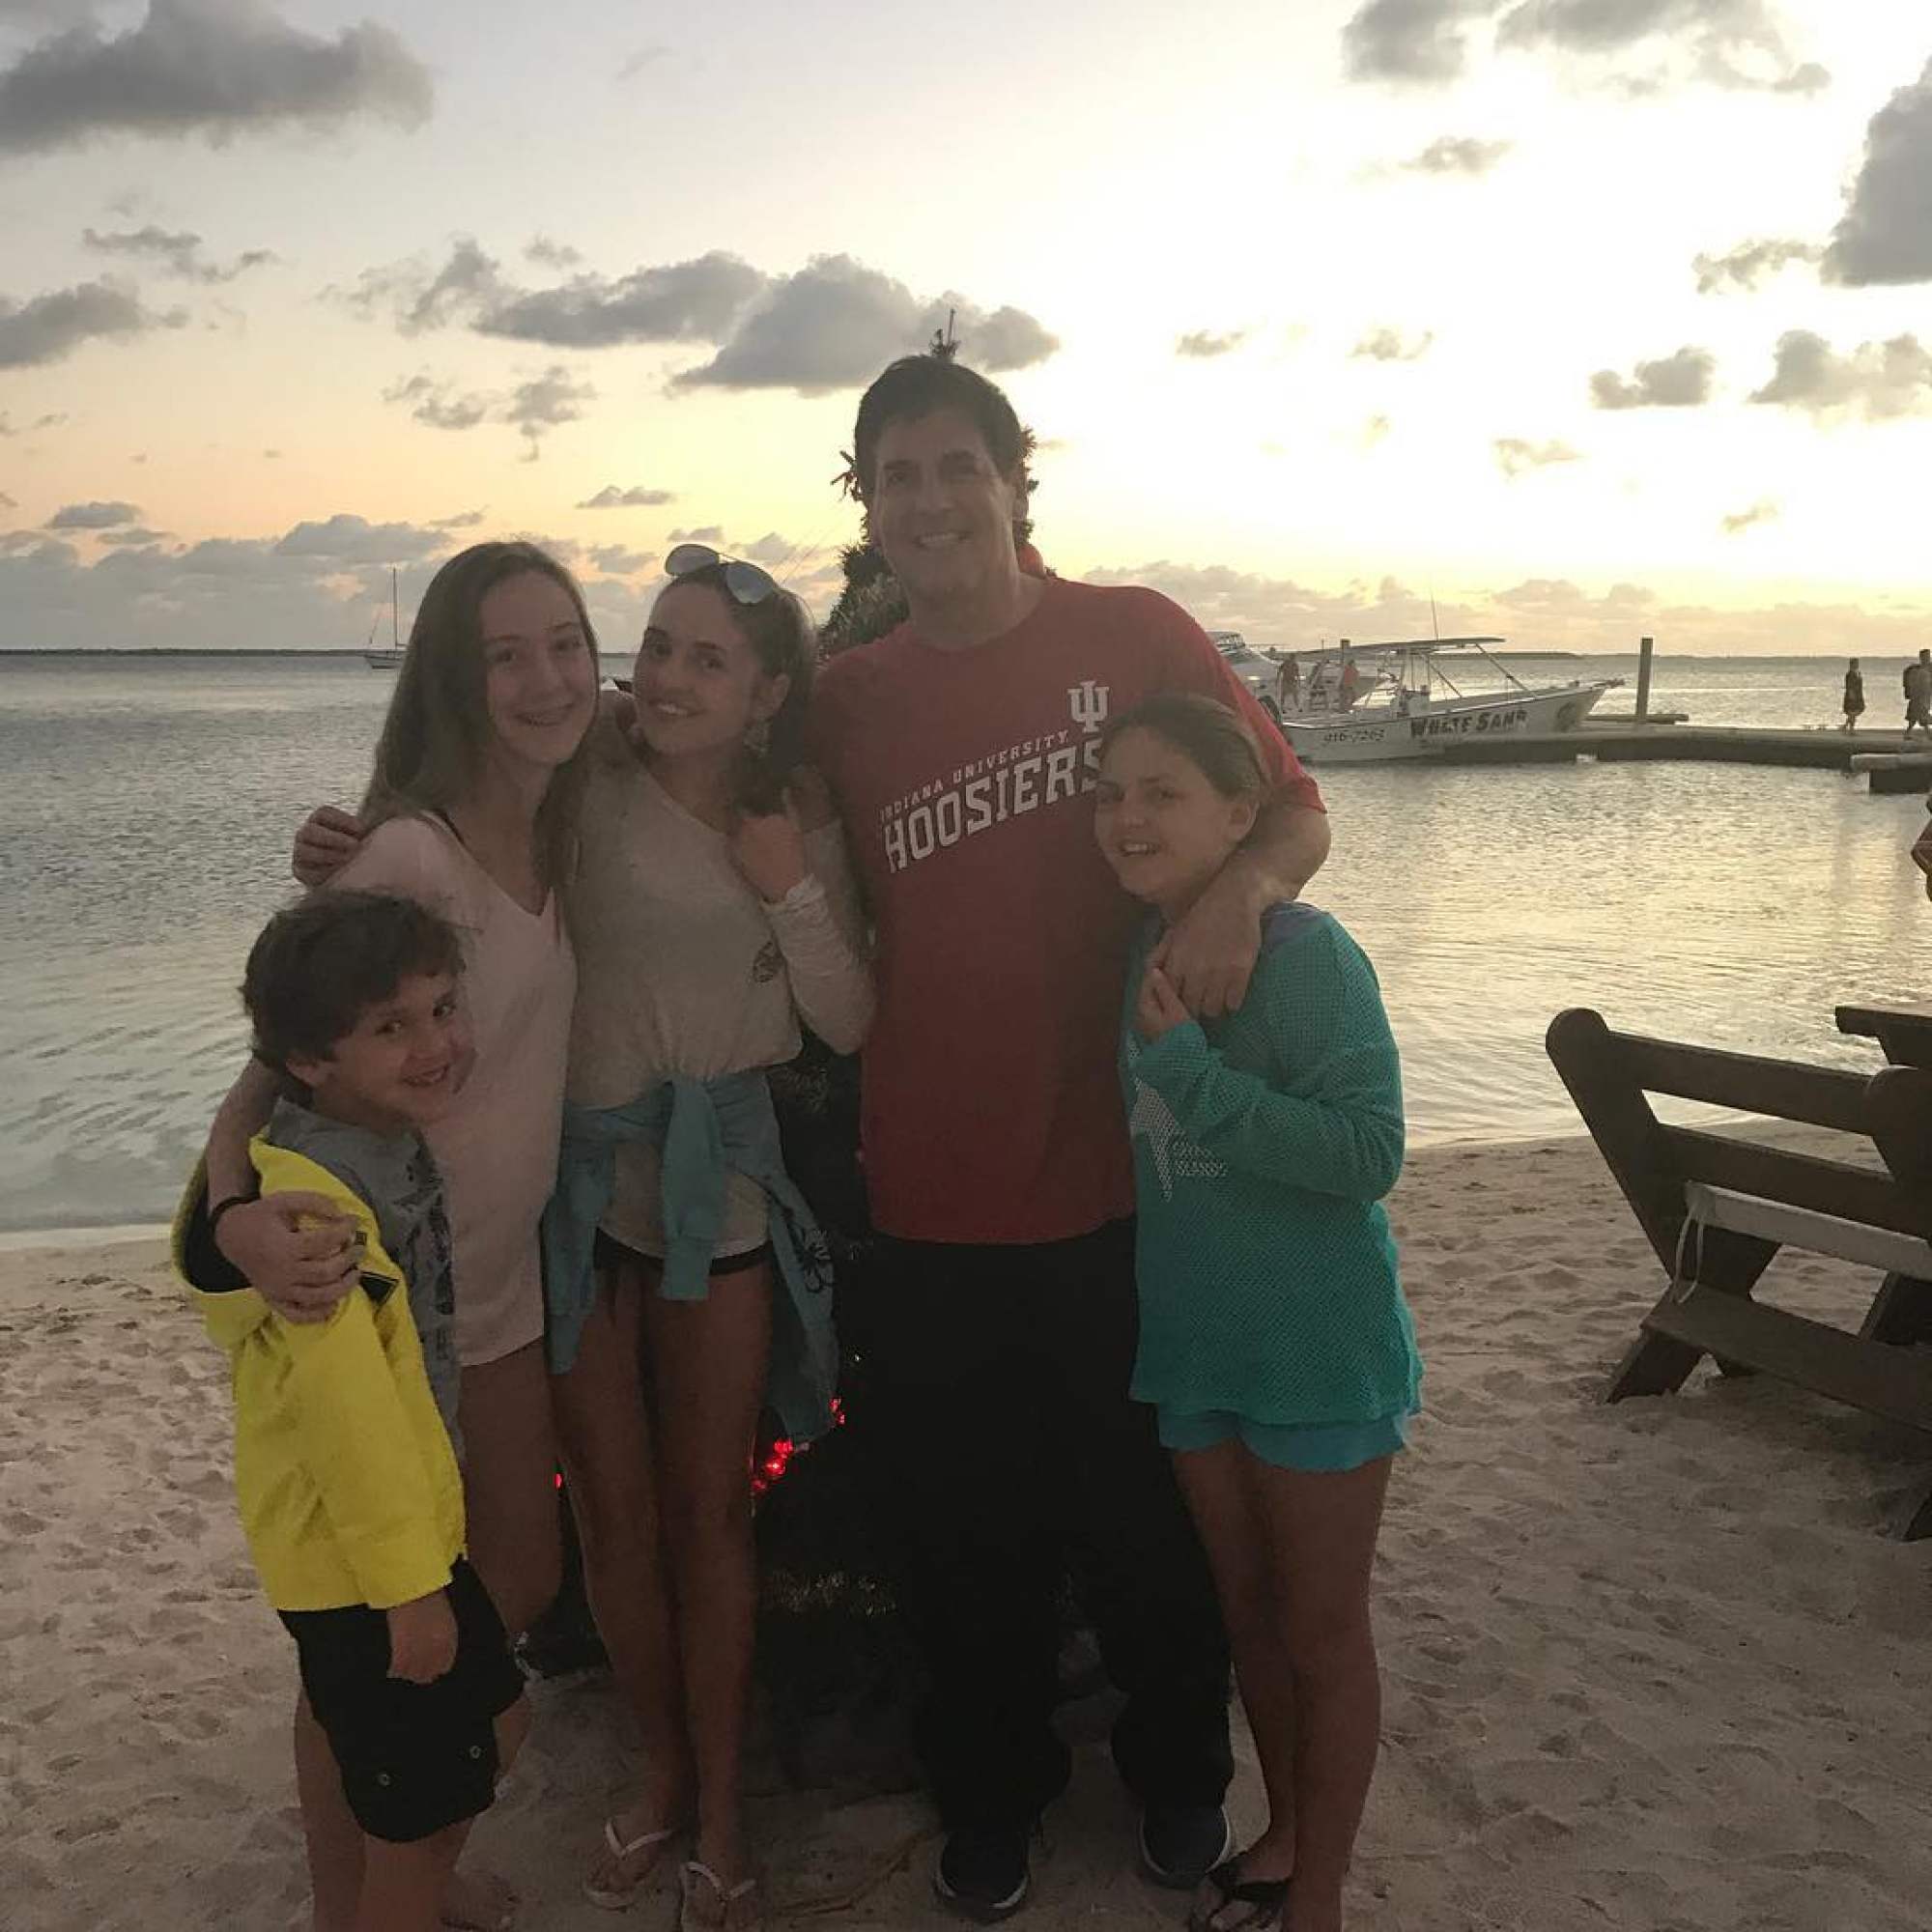 Inside Mark Cuban's humble parenting style: the Shark Tank billionaire  raised his 3 kids in a lavish mansion, but they don't have butlers and  chores are a must – he's close with